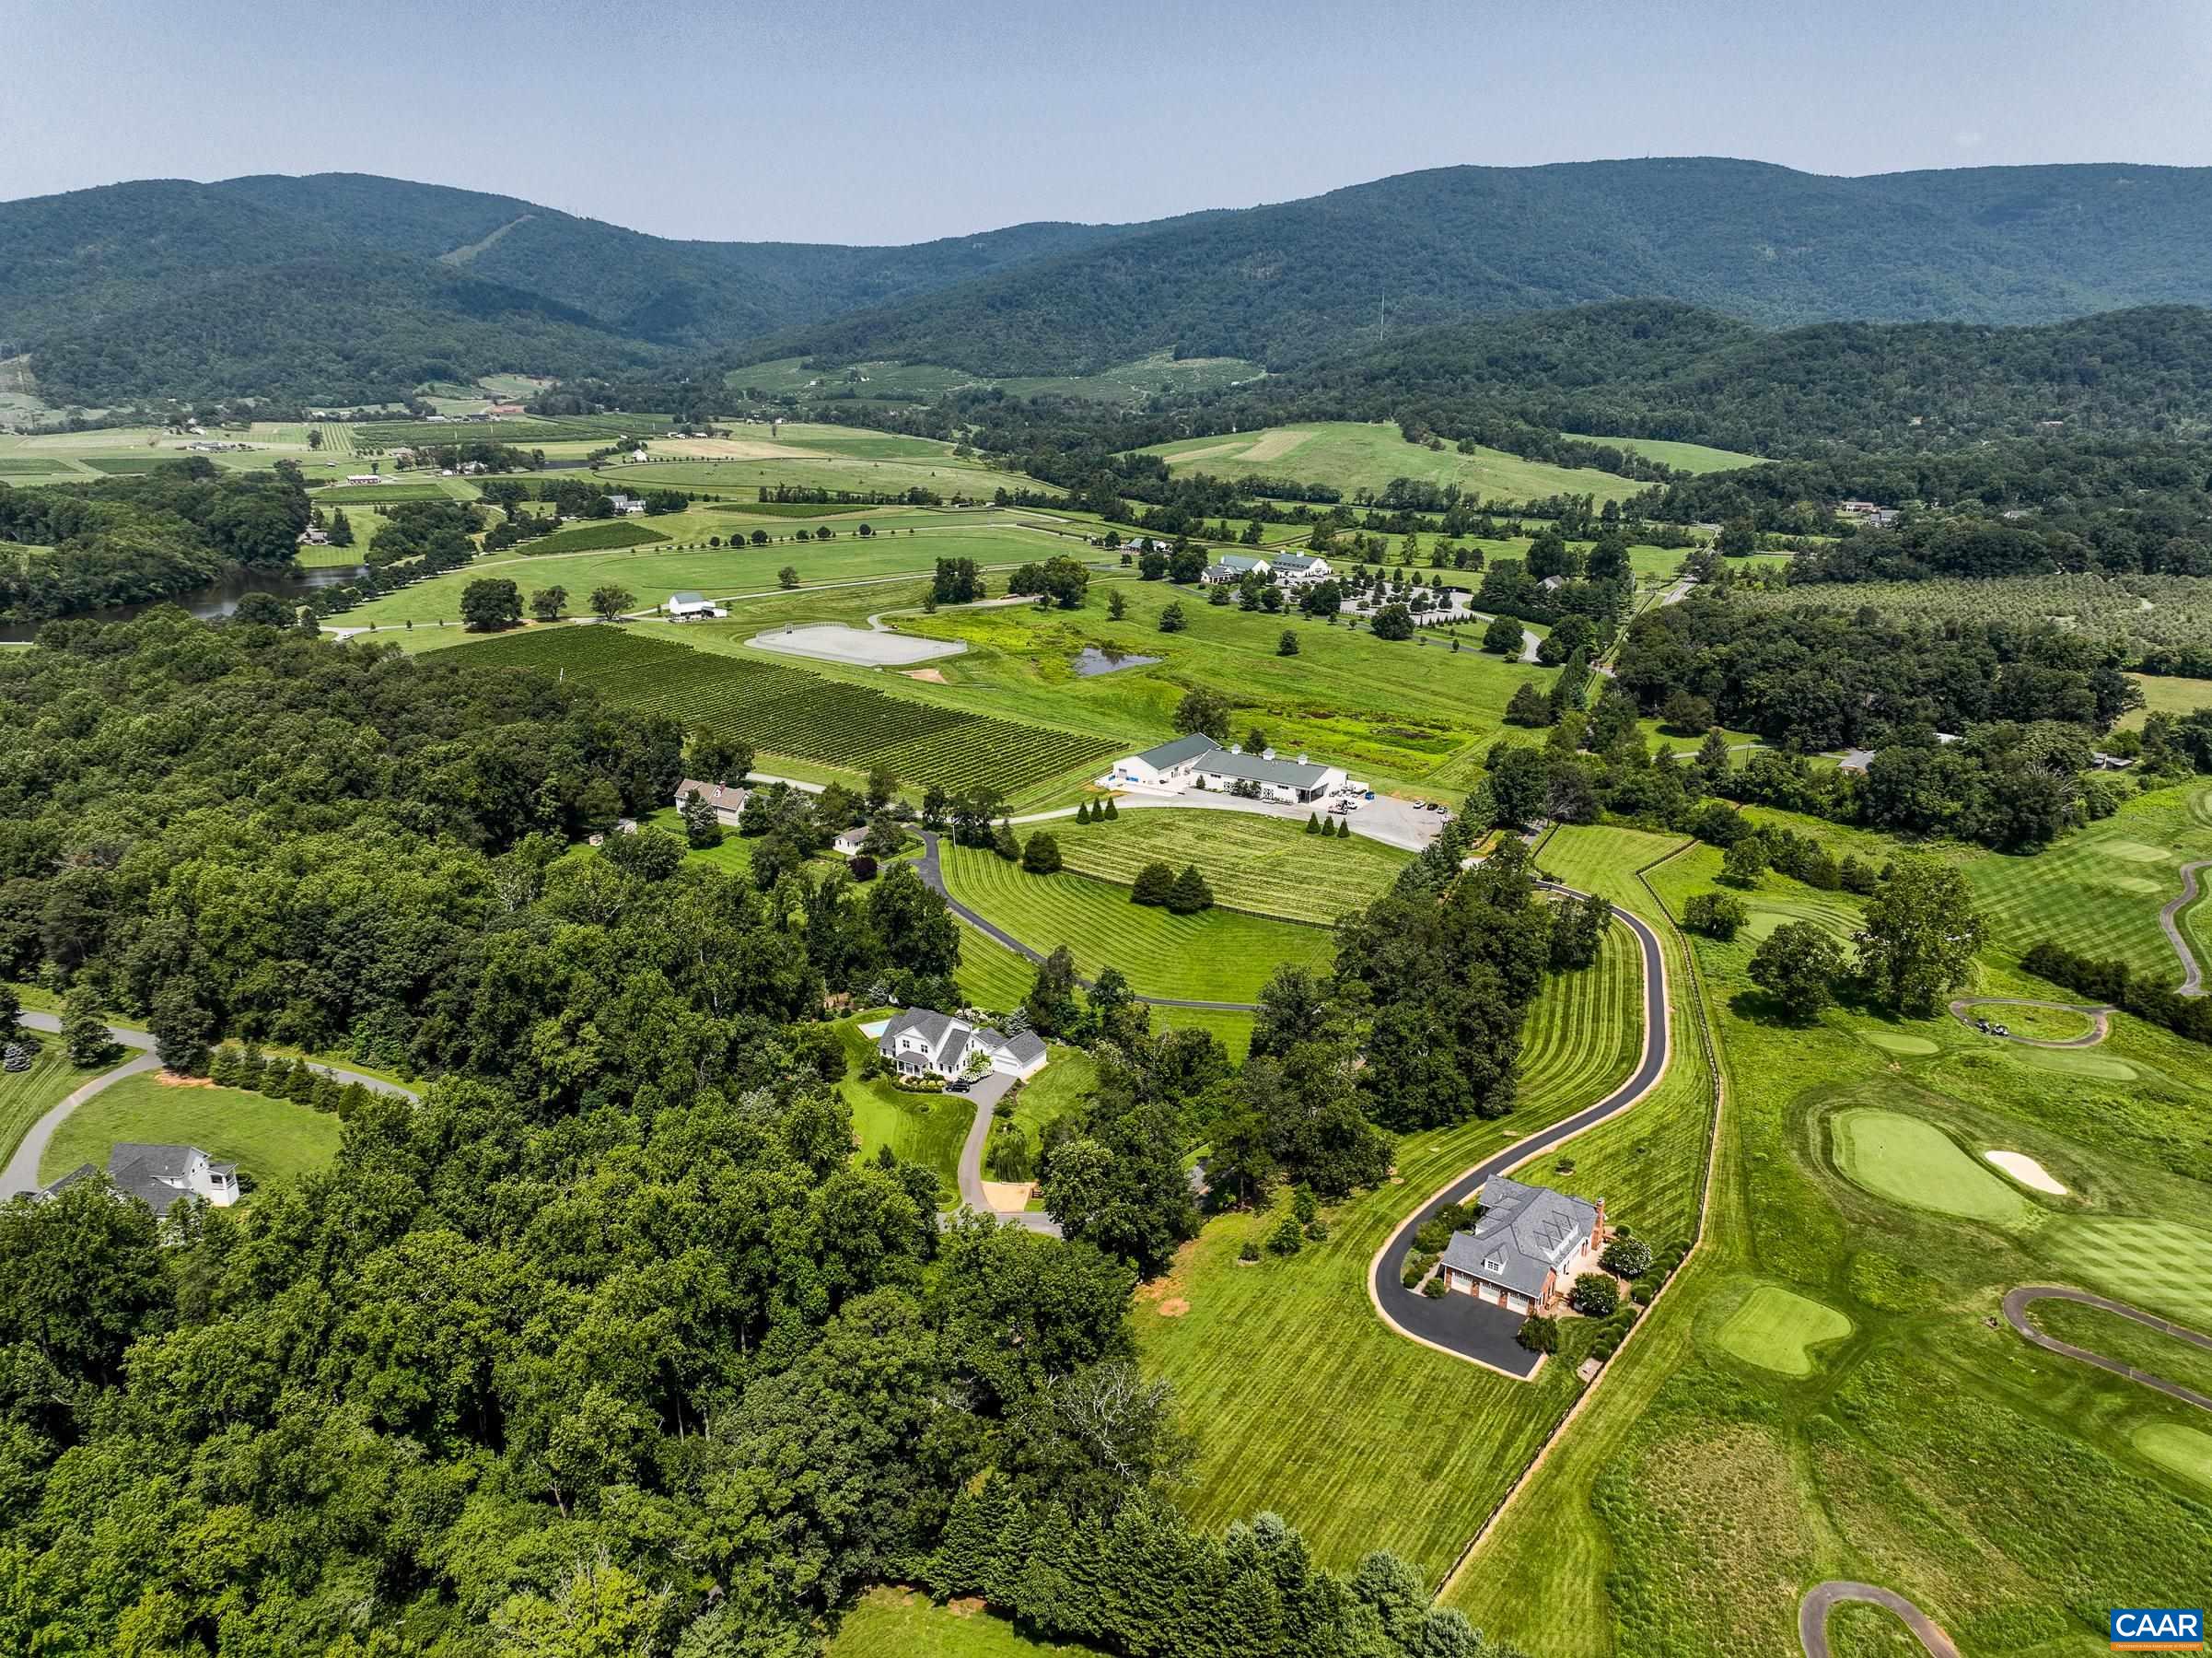 5+ acres overlooking Old Trail Golf Course tees 8 and 18 with incredible mountain views! Cross the street for wine and polo at King Family or enjoy the solitude in your own incredible retreat! This custom built home features 5 large bedrooms and space to expand even more! Gorgeous sustainable hardwood floors throughout the main level welcome you to this light-filled home. The formal living and dining rooms provide luxurious spots for entertaining, but the true heart of the home is the stunning great room with exposed wood vaulted ceiling and stone fireplace and incredible views of the golf course and blue ridge mountains. Gourmet chefs will love the kitchen with cherry cabinets, Silestone counters and bamboo breakfast bar. High end stainless steel appliances sparkle, and the butler's pantry hides small appliances and provides a spot for a wine bar or coffee bar. Escape to the main level primary retreat with two walk-in closets and ensuite bathroom with soaking tub and tile shower.  Upstairs three large bedrooms each feature window seats and large closets.  Two and a half bathrooms give everyone space.  The walk-out lower level features a large rec room and fifth bedroom with multiple unfinished spaces to expand. See agent notes!